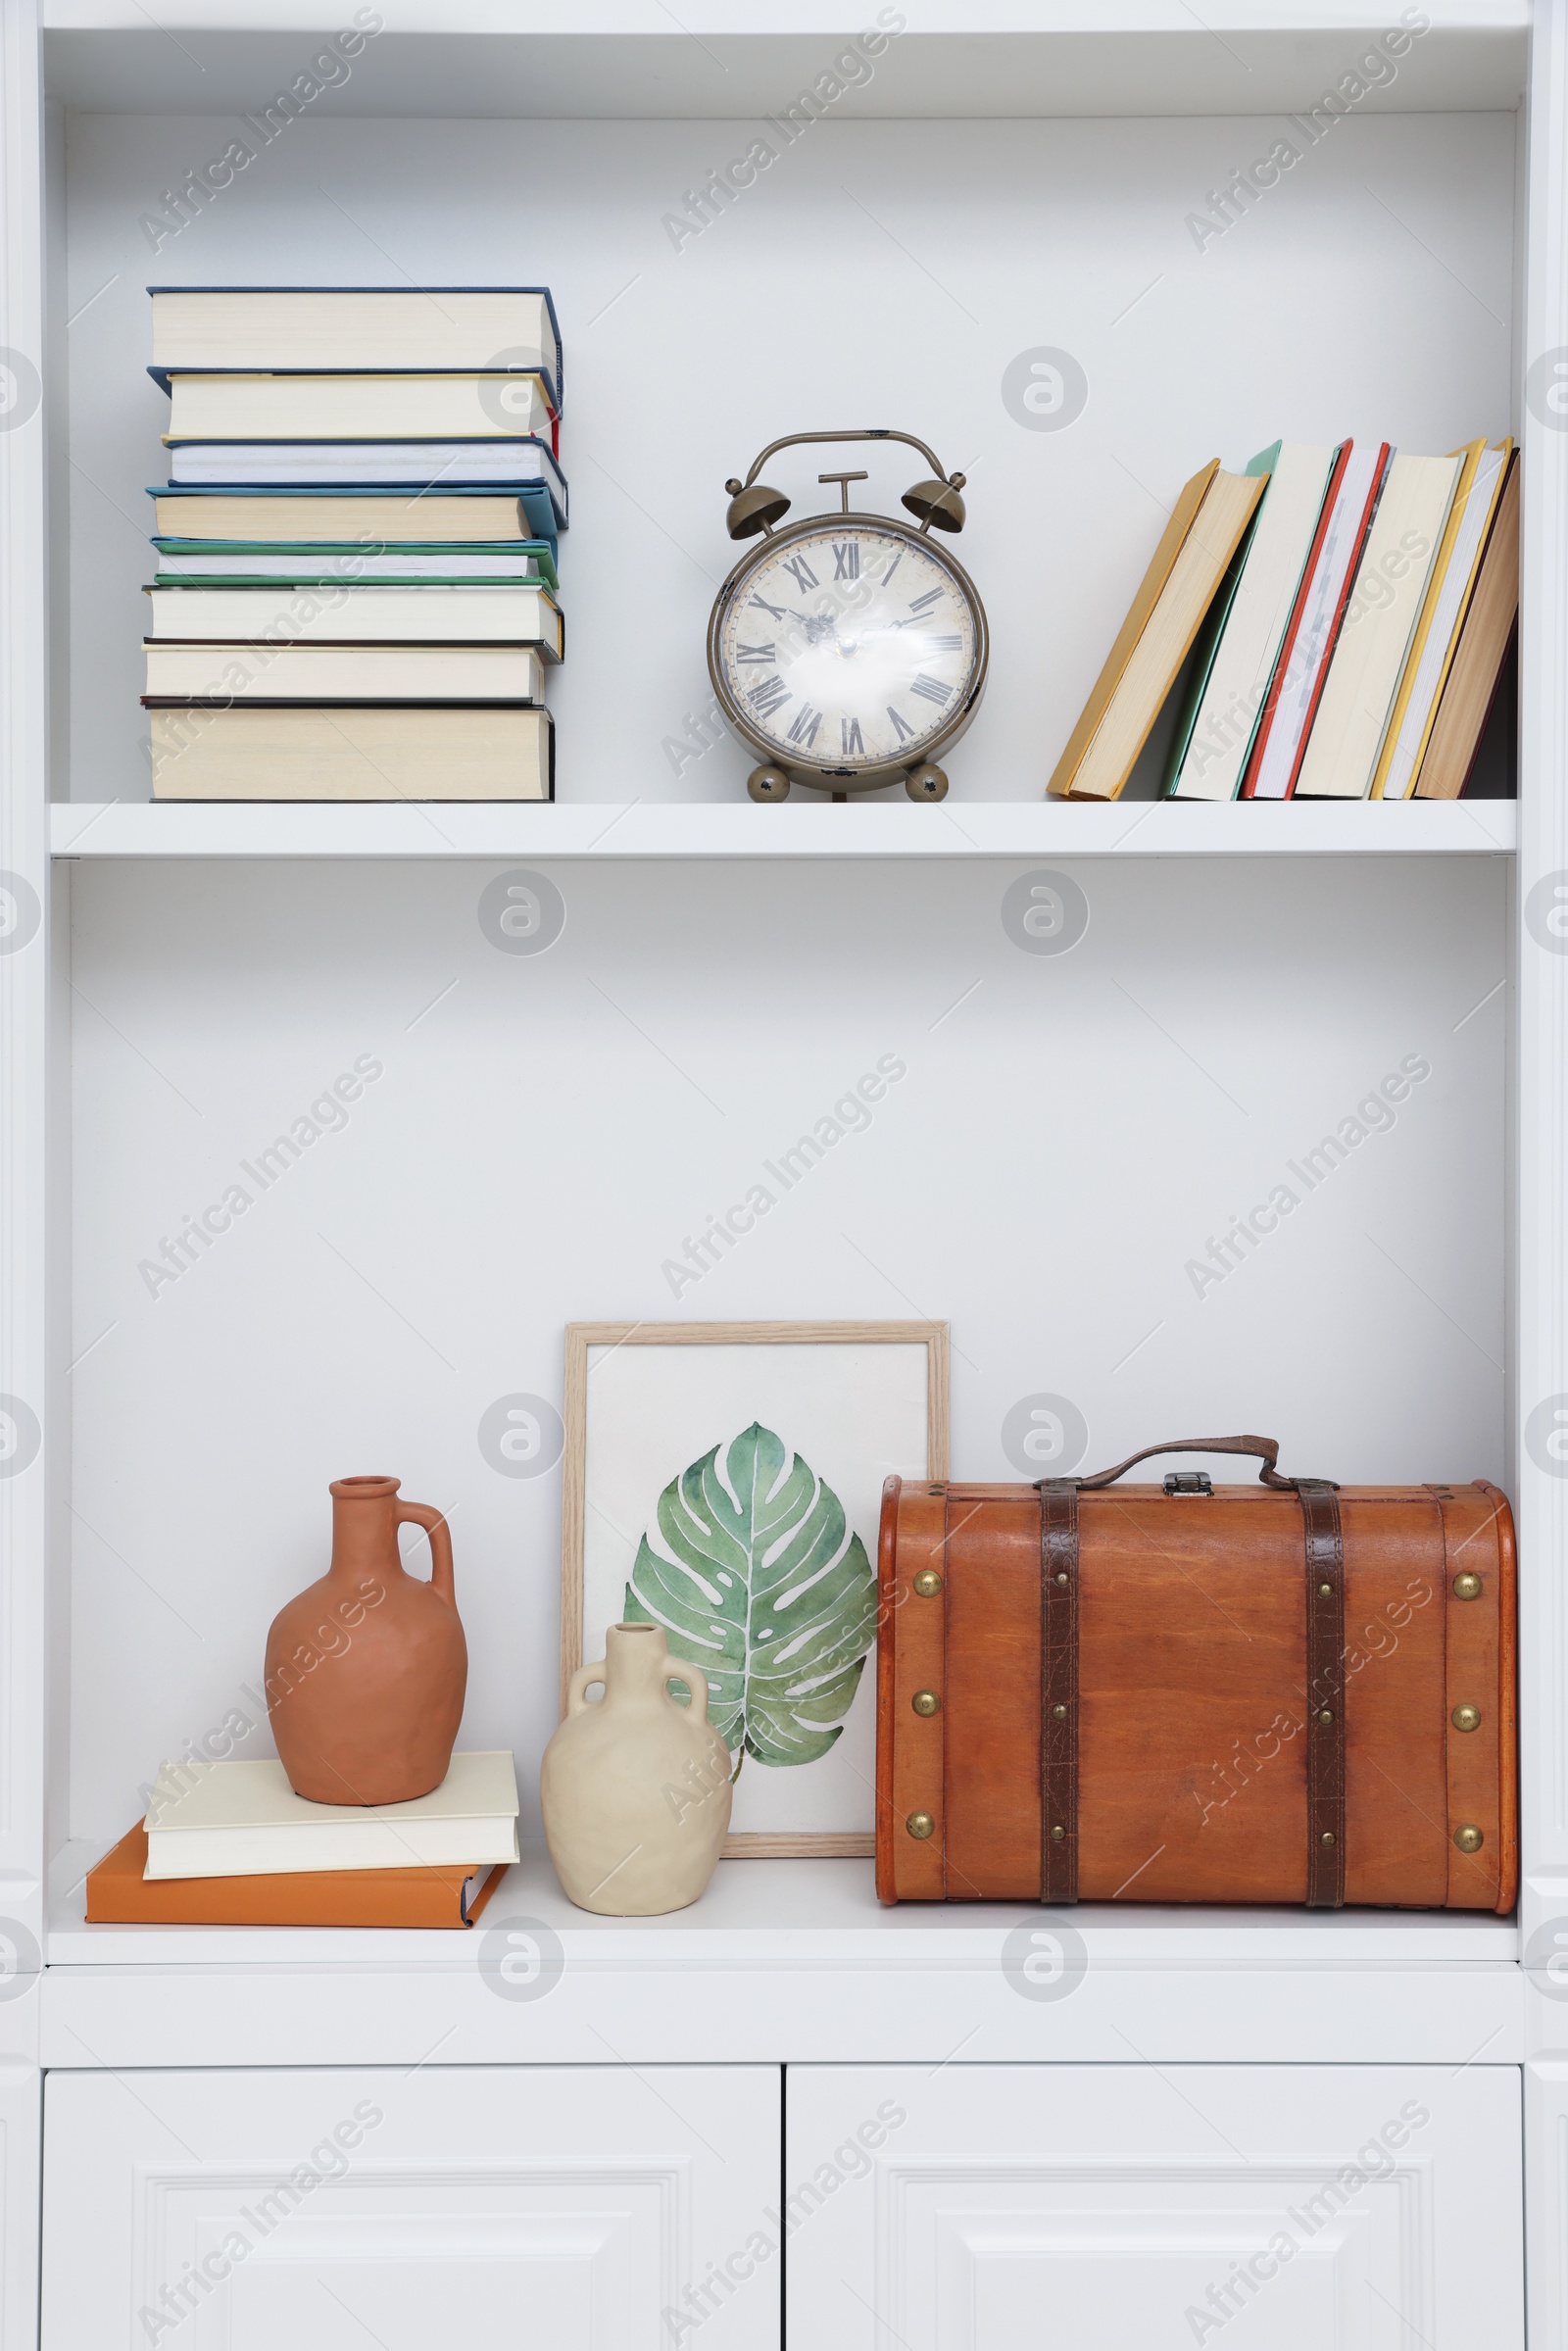 Photo of Books and different decorative elements on shelving unit indoors